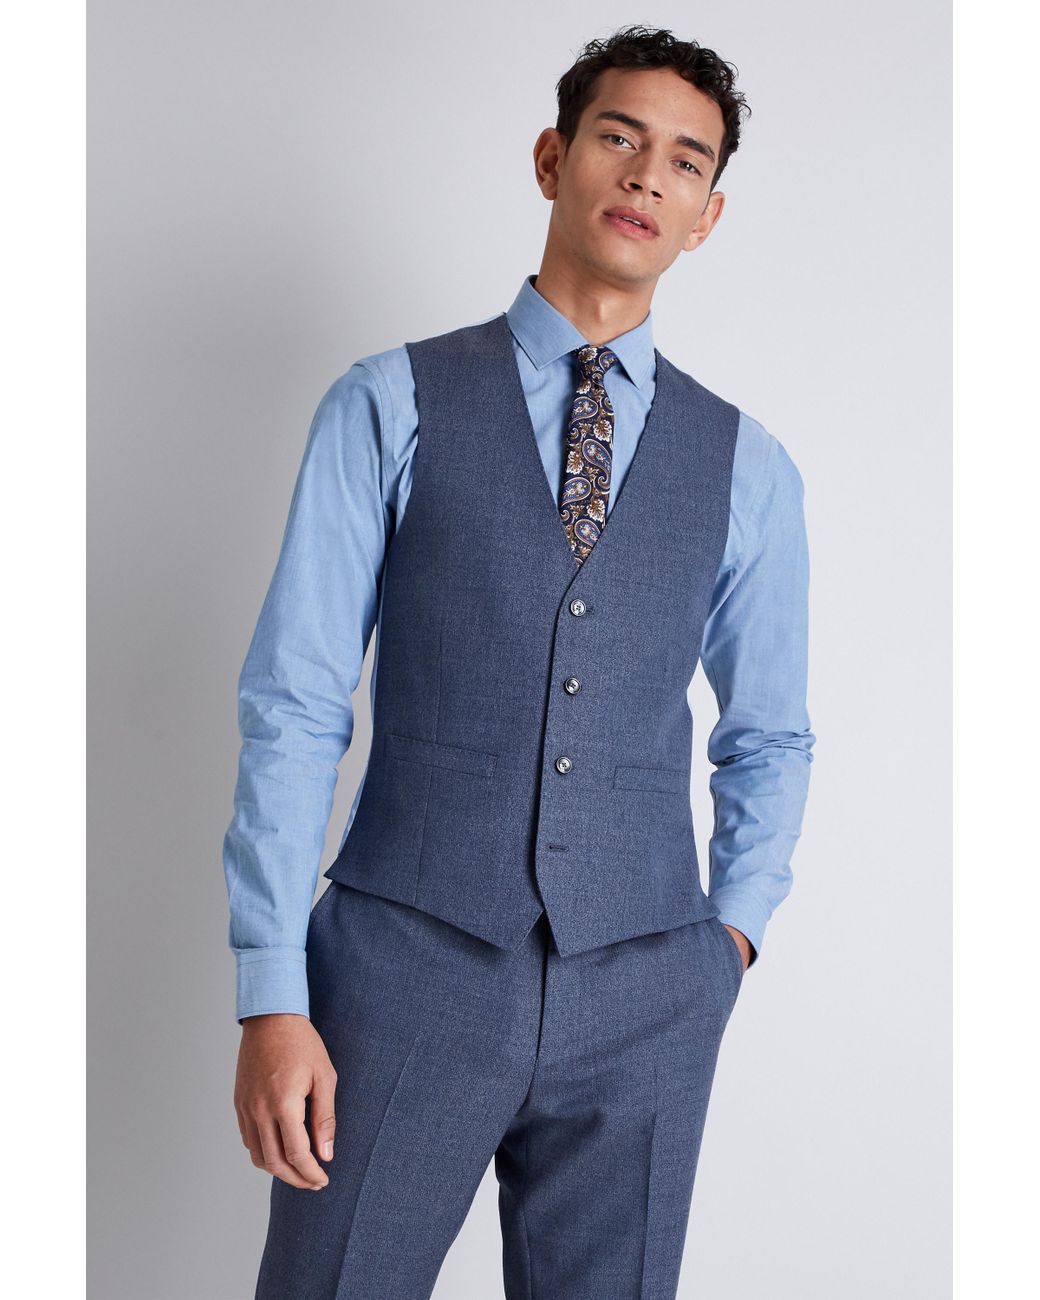 French Connection Wool Slim Fit Blue Mist Waistcoat for Men - Lyst